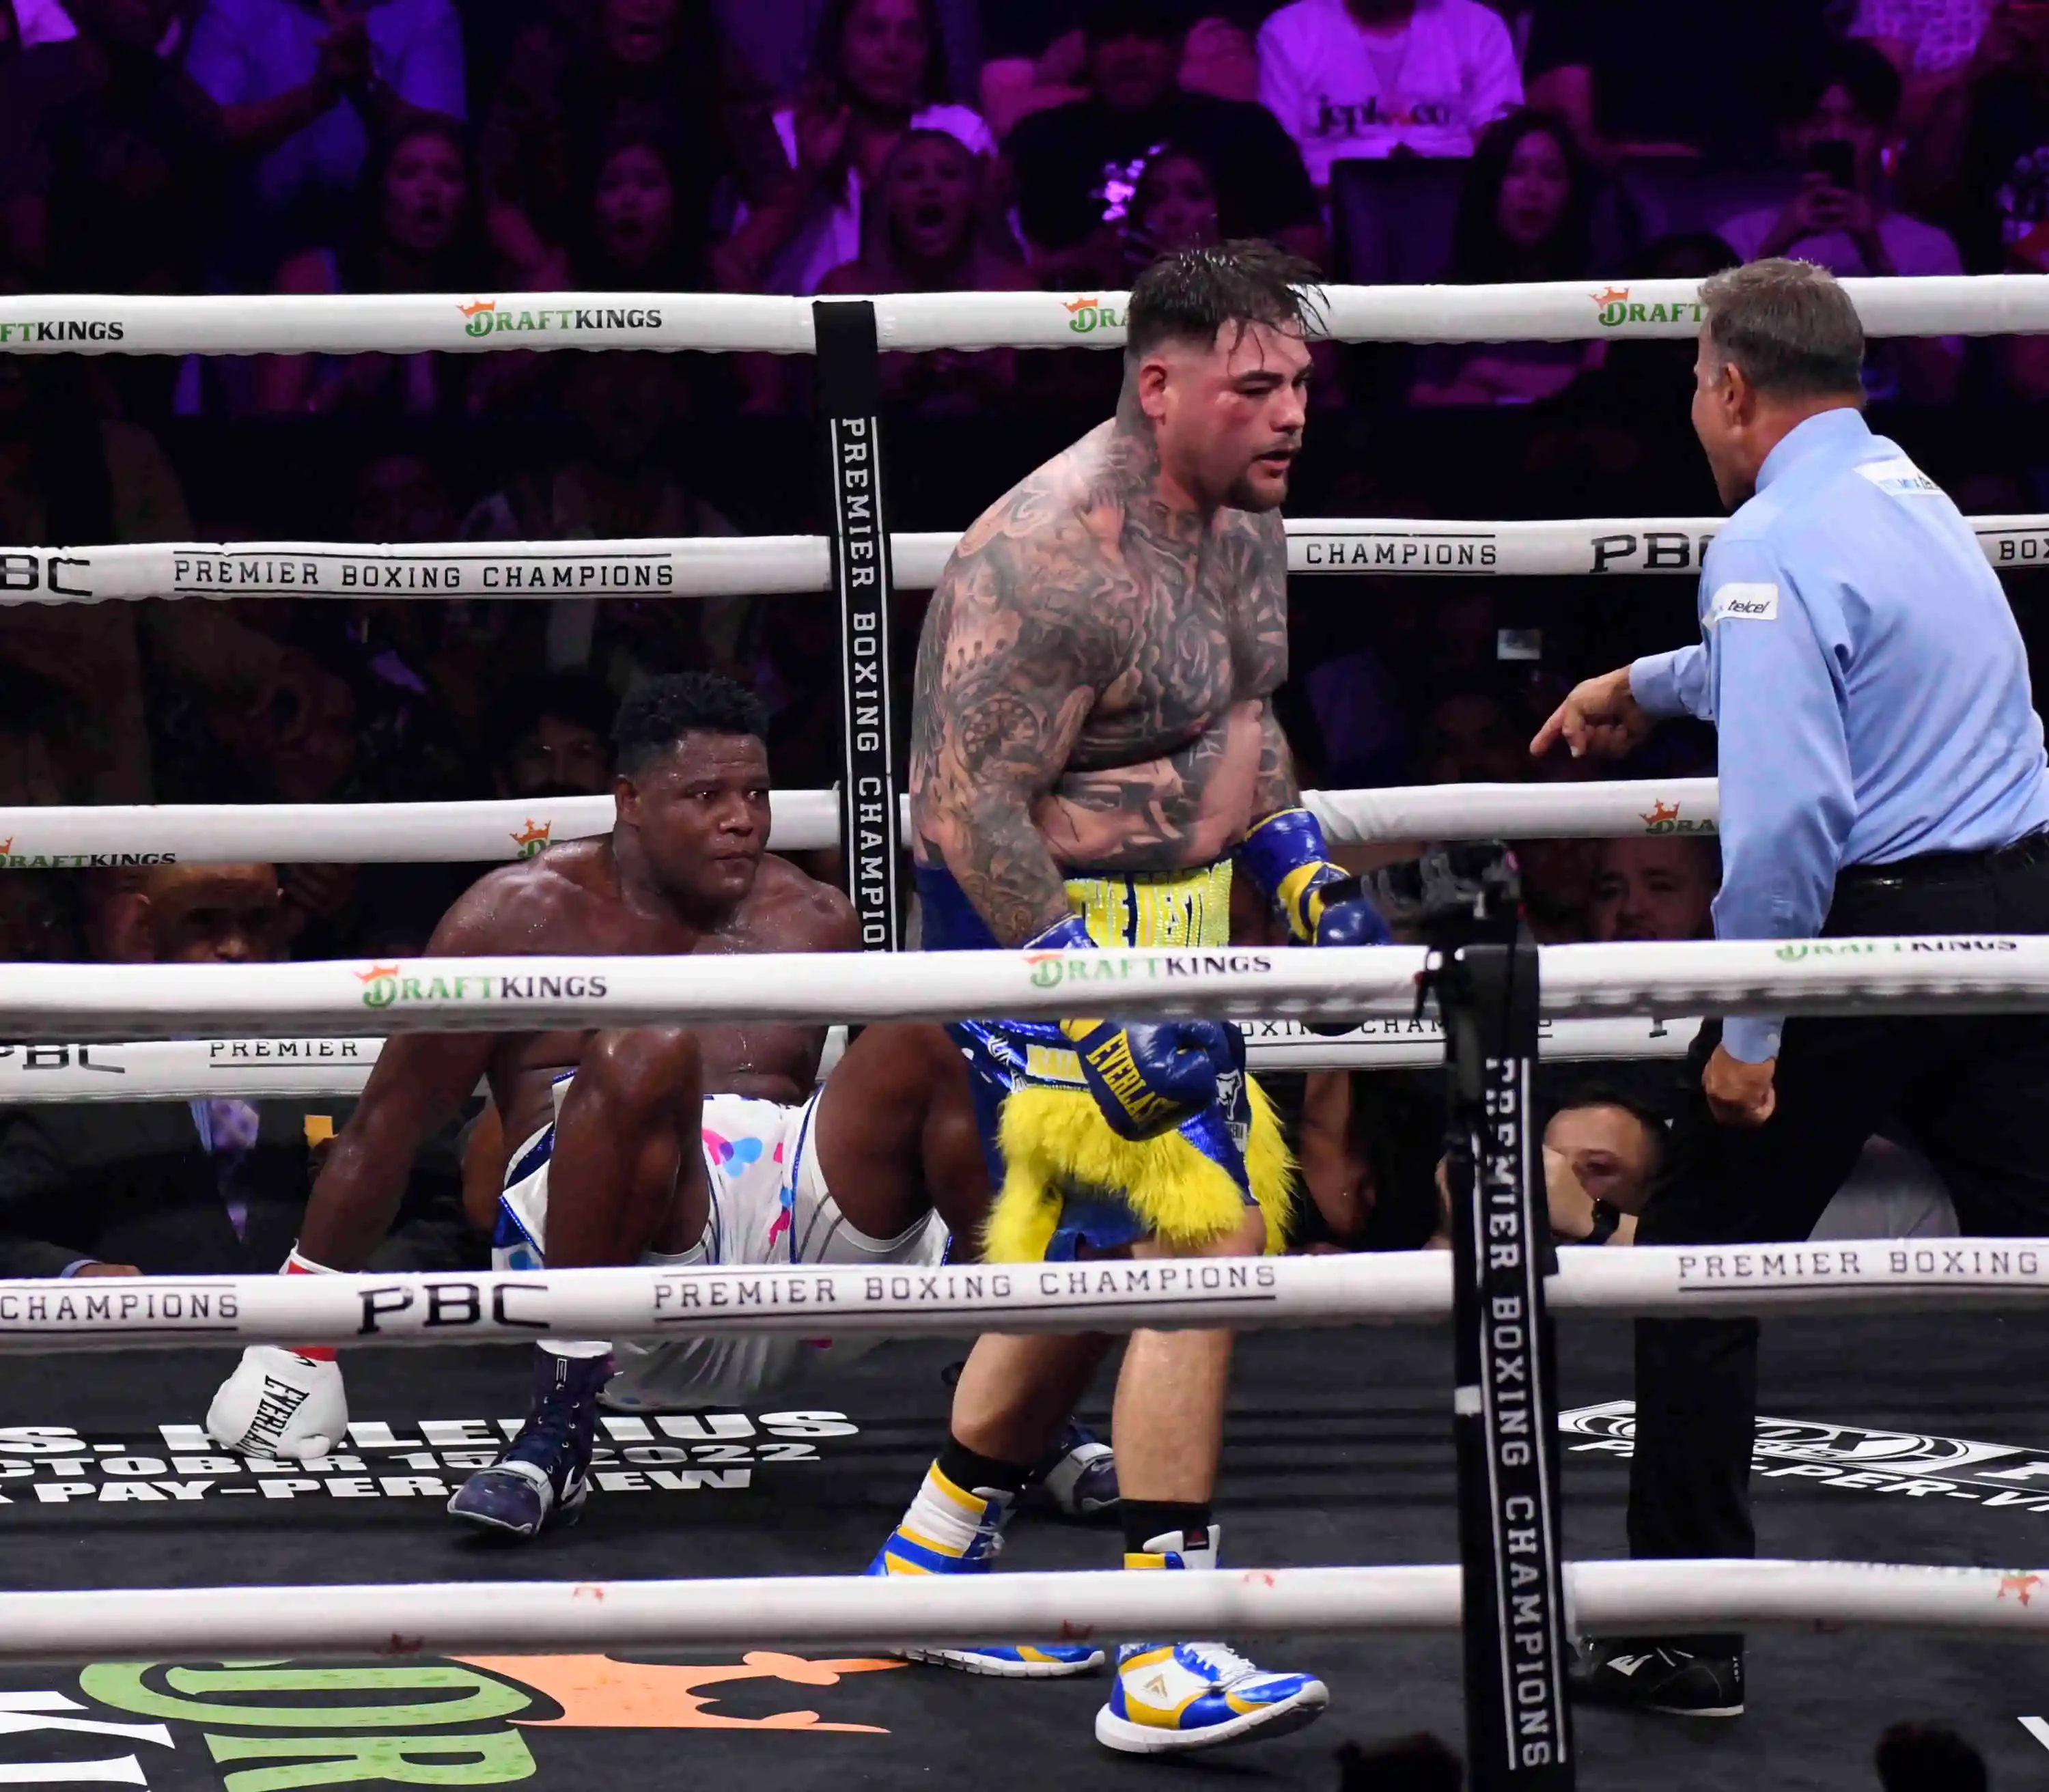  Andy Ruiz Jr sends message to Deontay Wilder after defeating Luis Ortiz via unanimous decision win